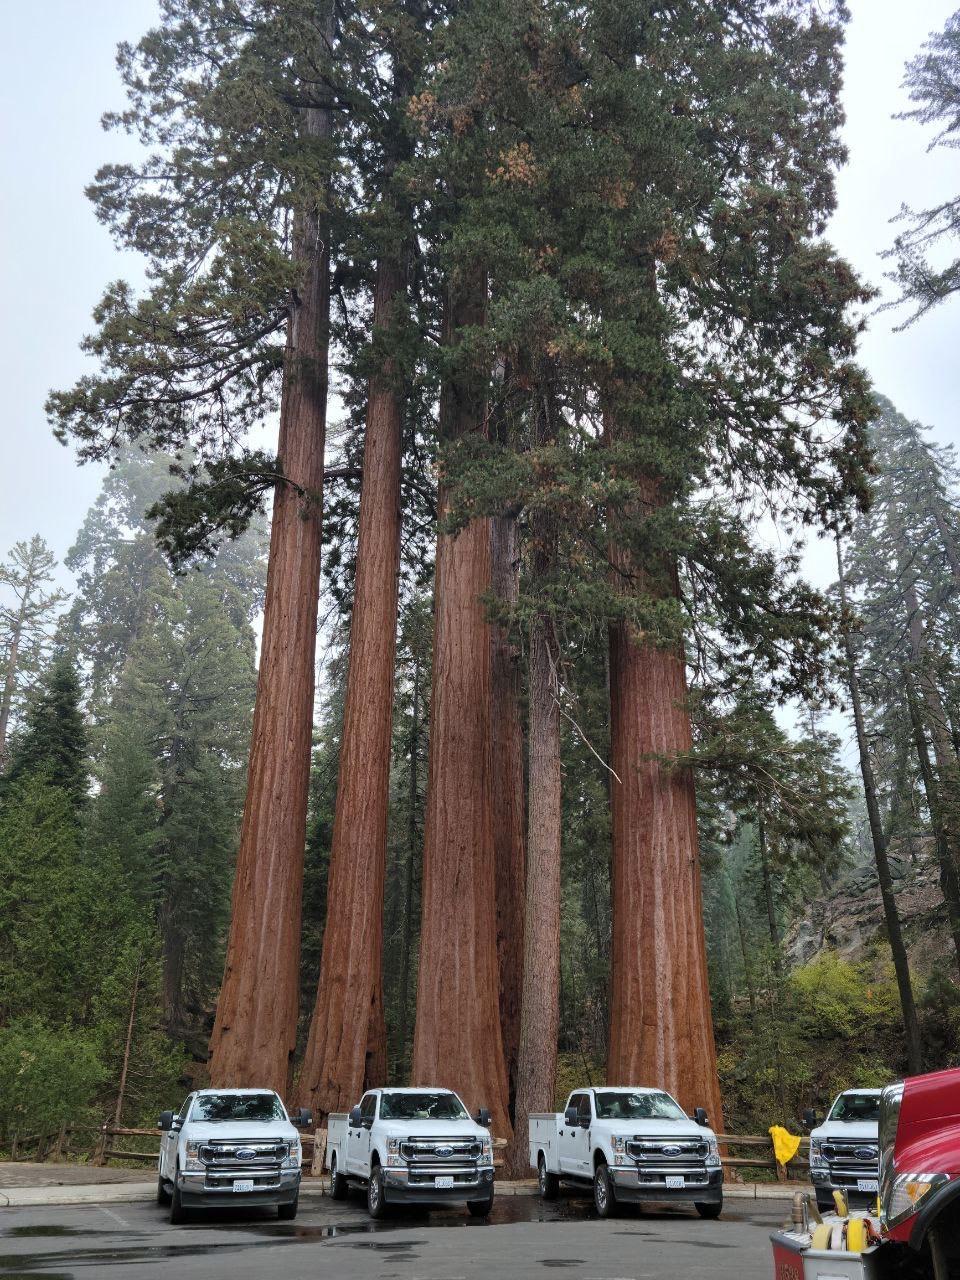 U.S. Forest Service Trucks in Giant Grove Parking Area.